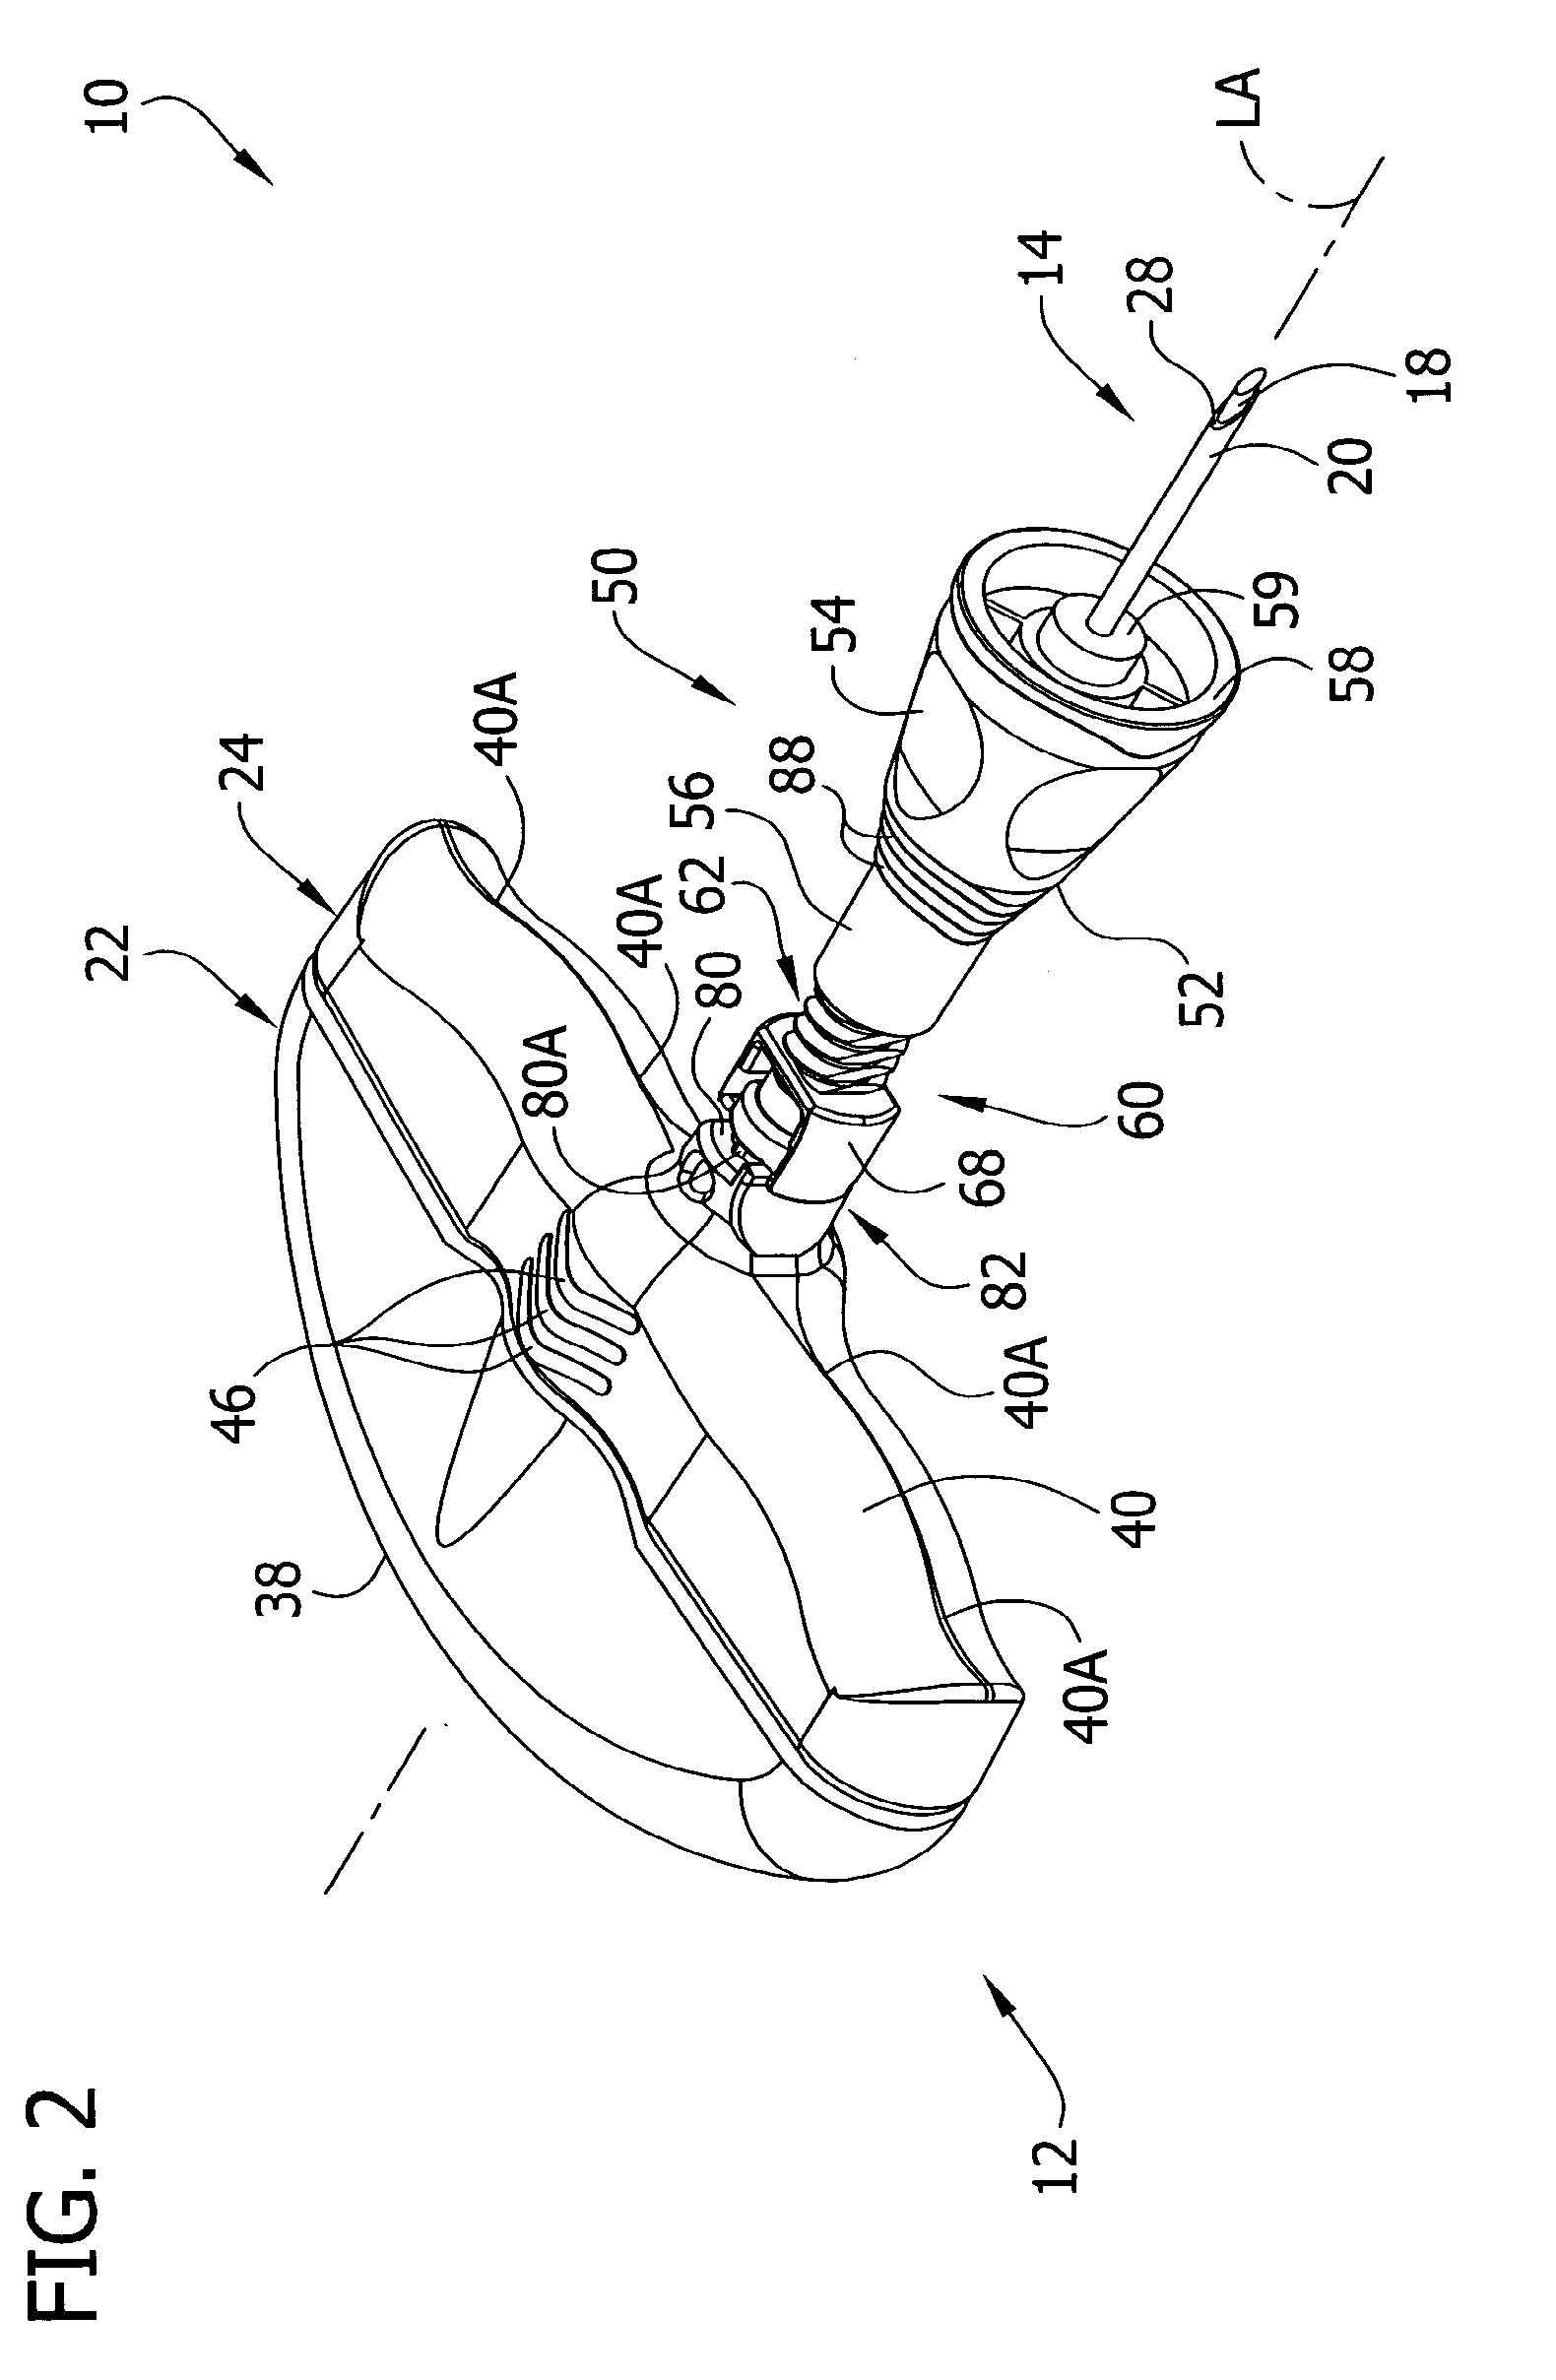 Needle Assembly with Removable Depth Stop